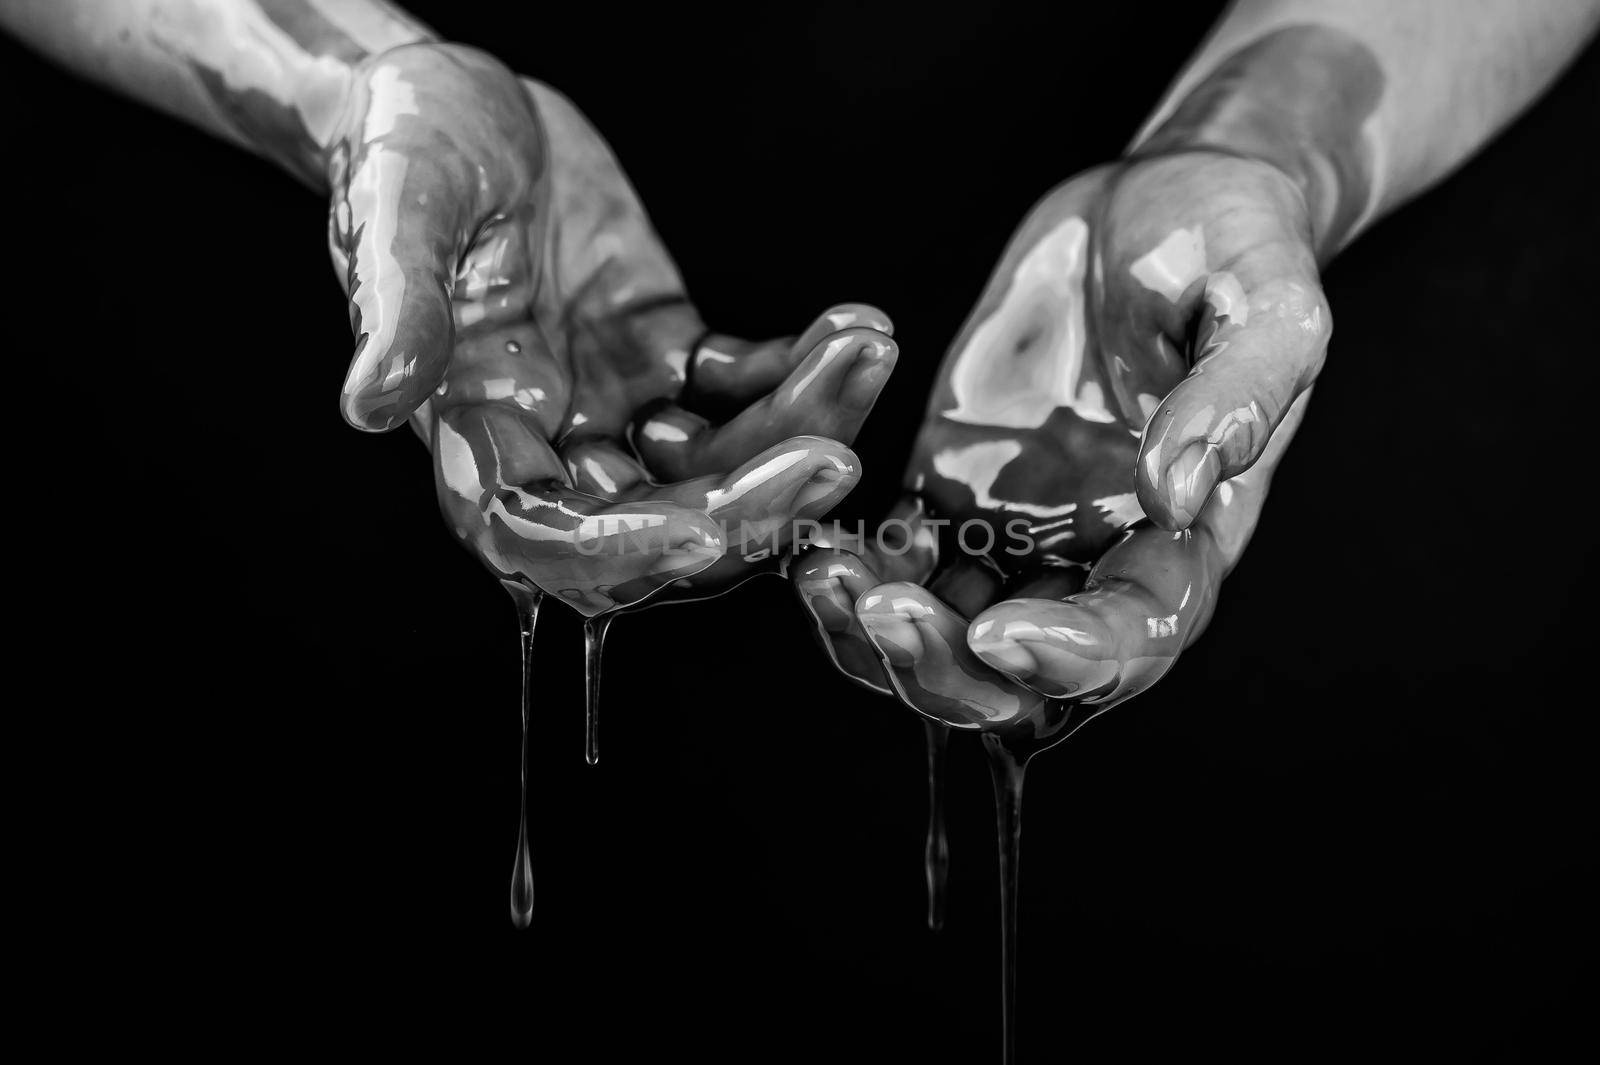 Women's hands in a viscous liquid similar to blood. Black and white photo